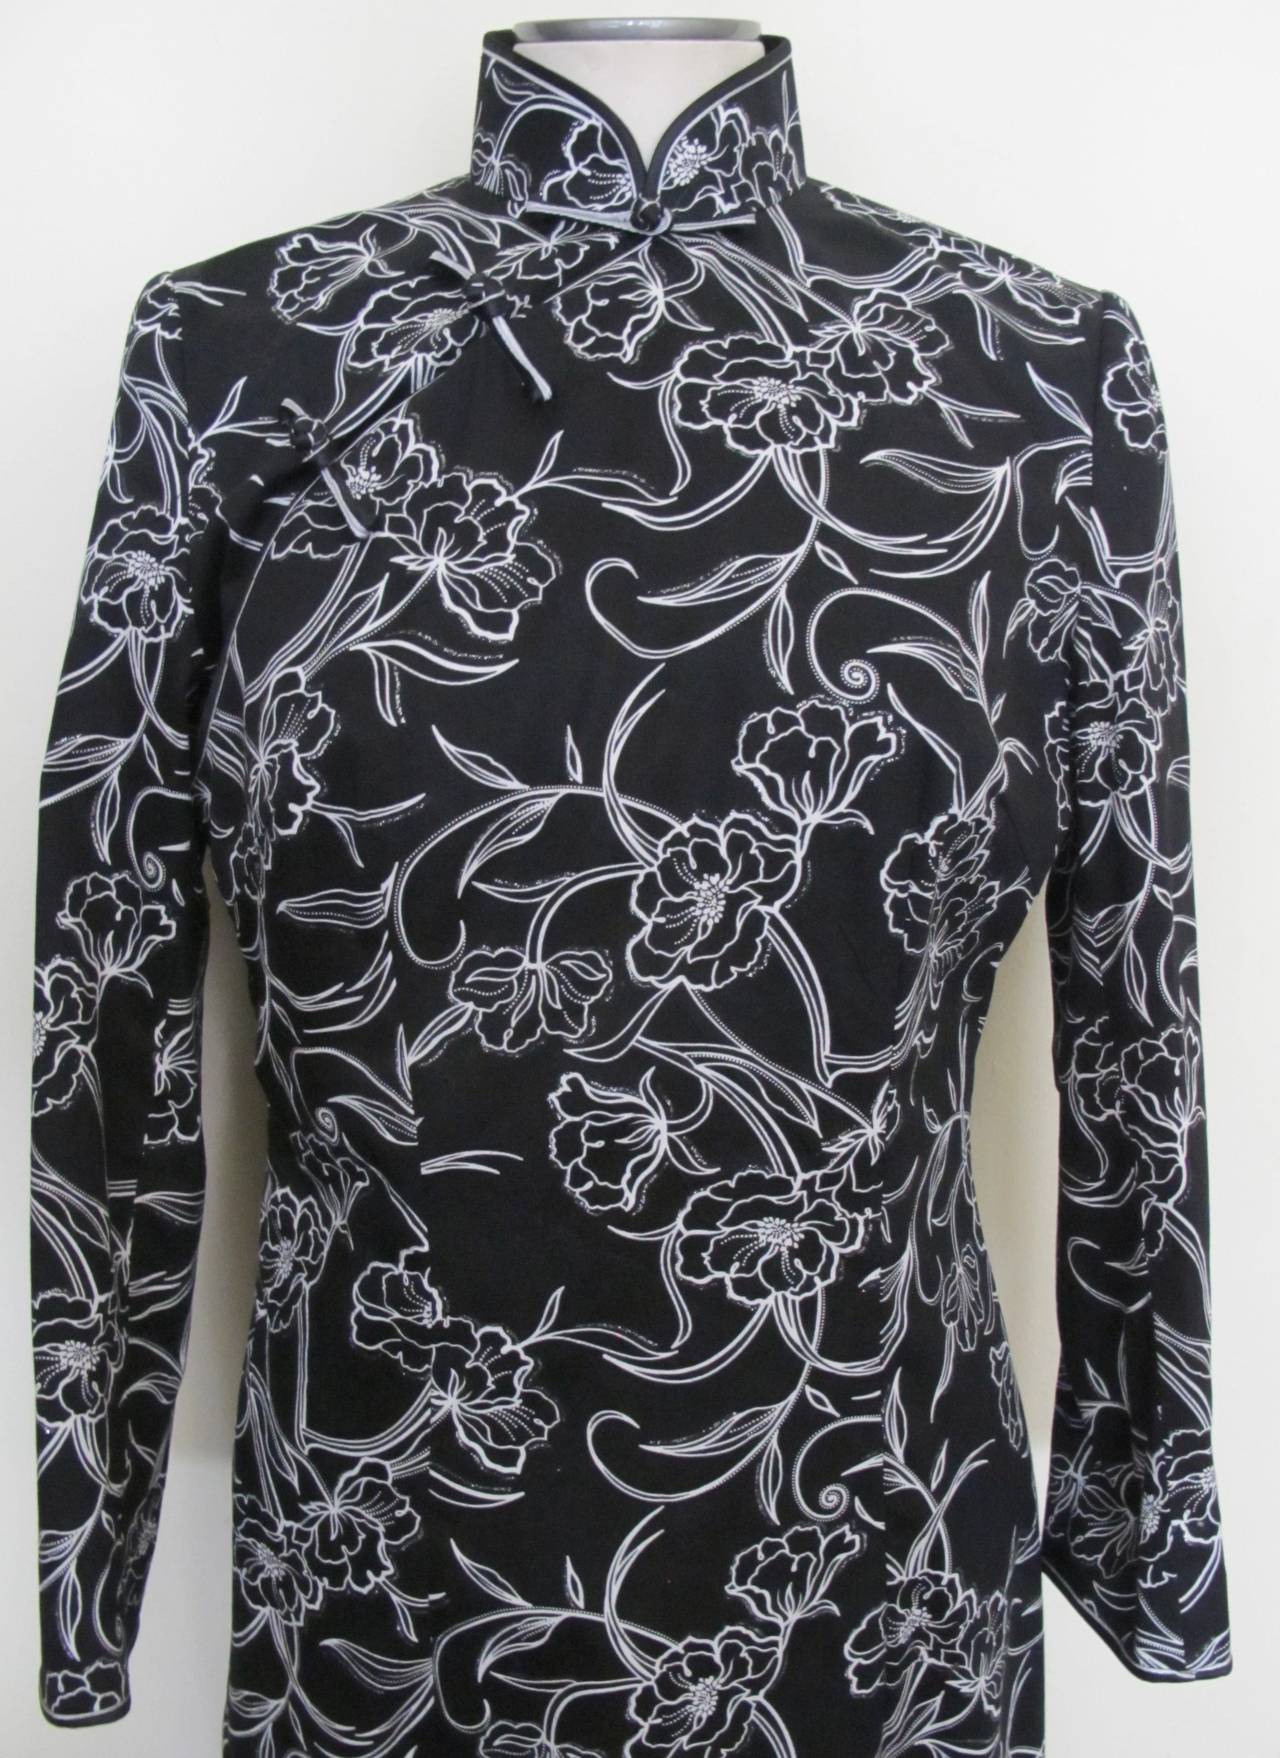 Qipao Black Silk Cotton Dress with White Flower Design and Silver Decents For Sale 2